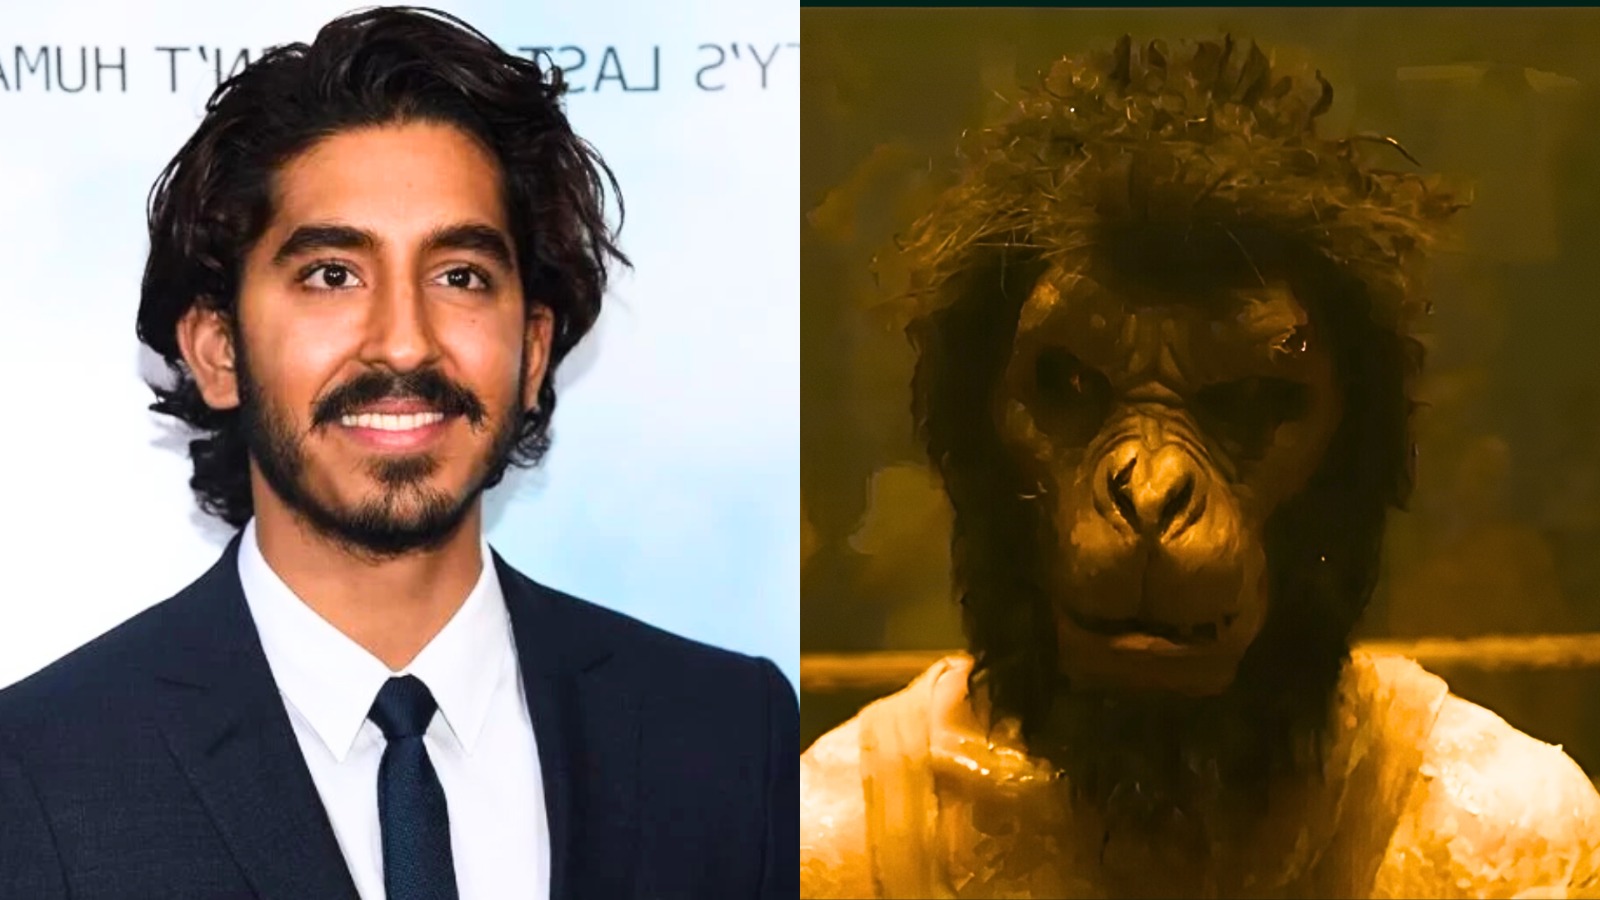 Dev Patel Holds Back Tears After He Receives Standing Ovation at ‘Monkey Man’ World Premiere. Watch